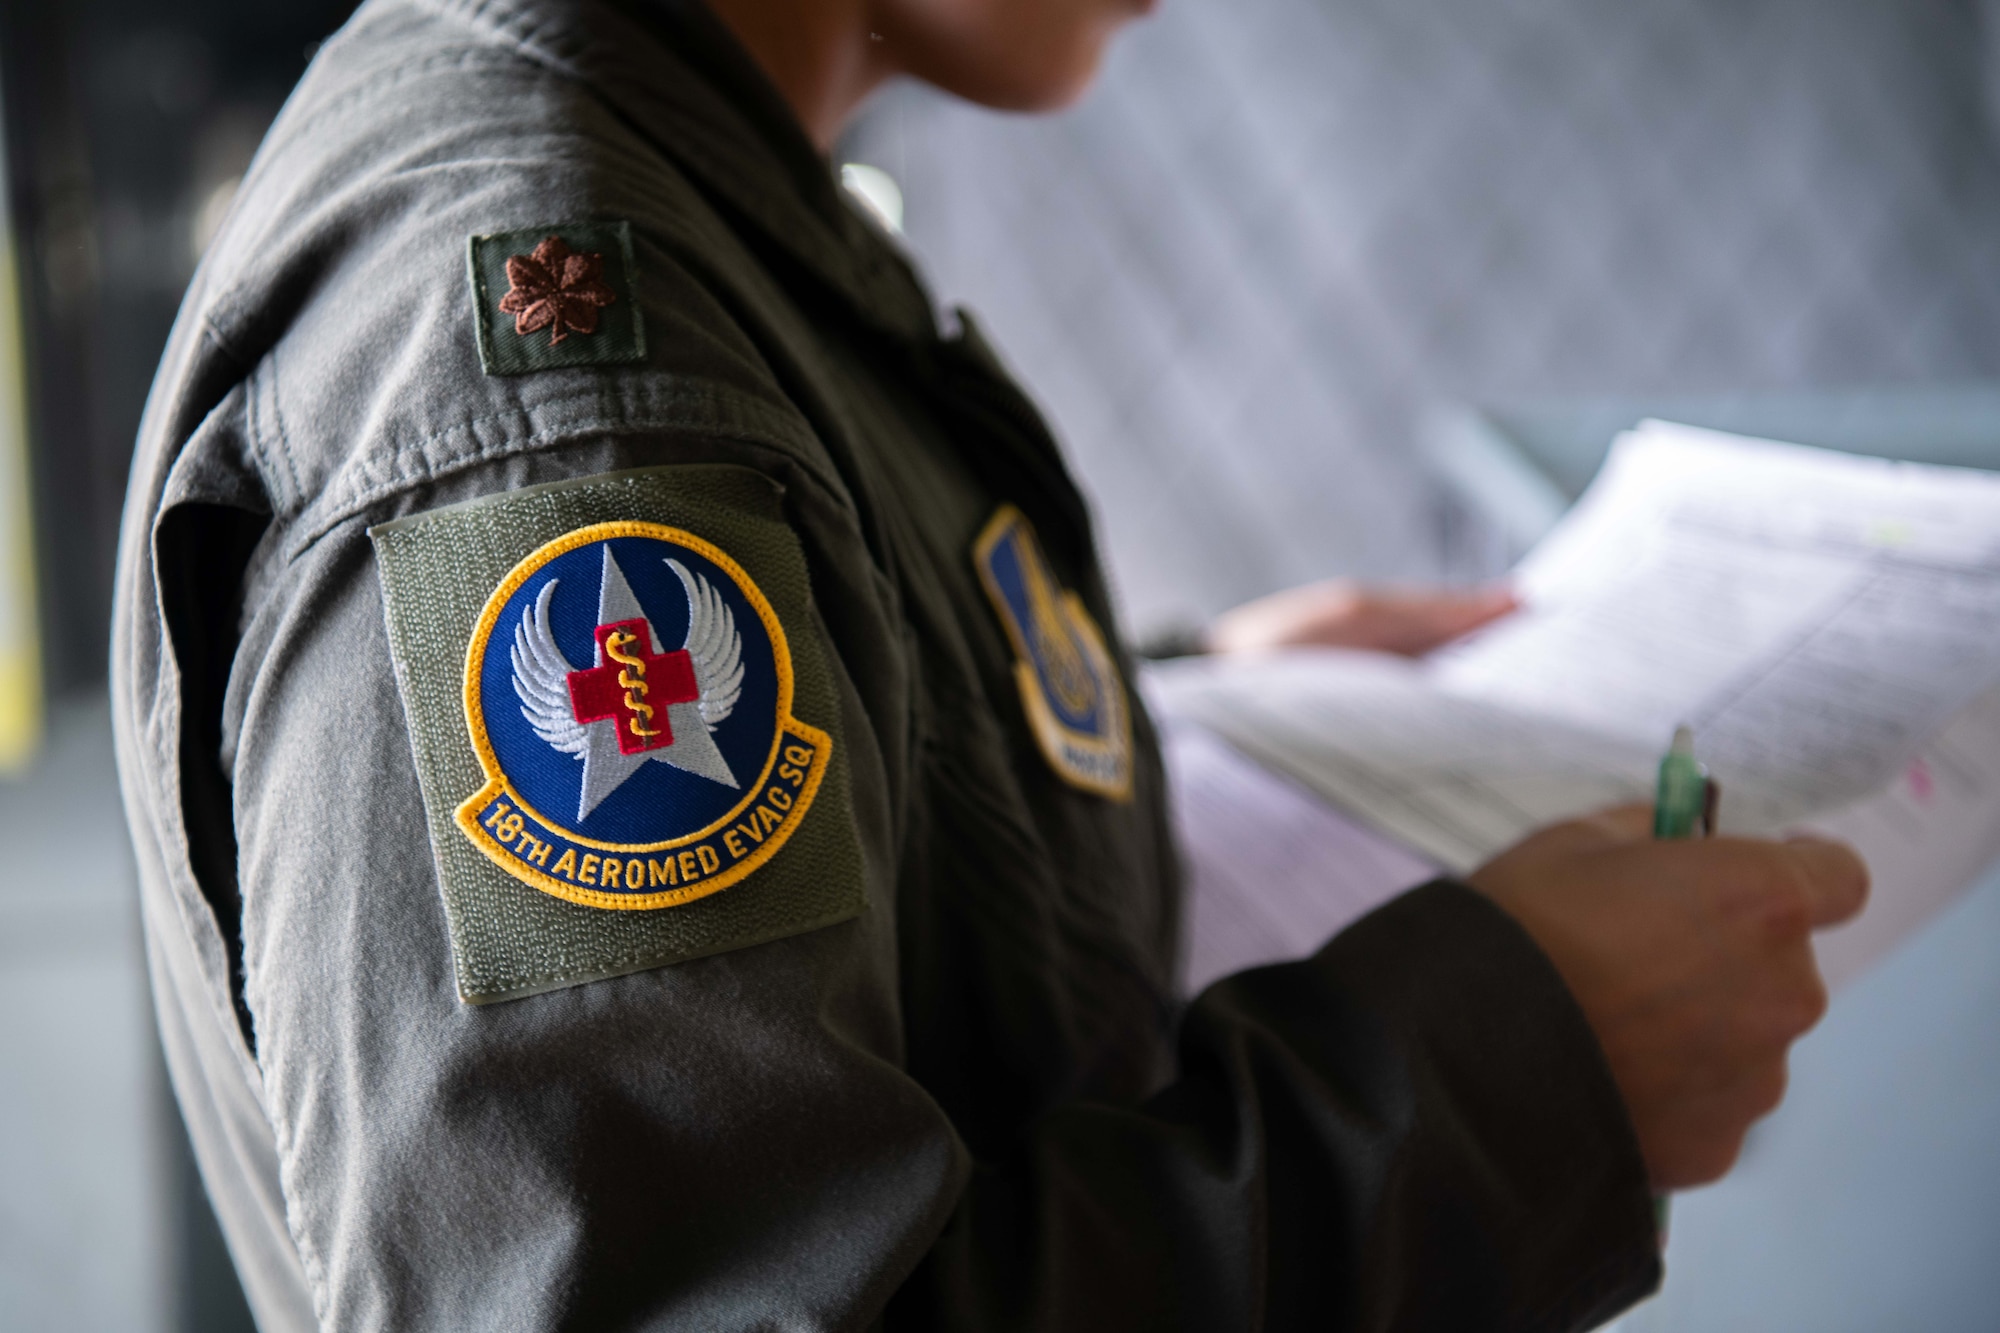 An 18th Aeromedical Evacuation Squadron patch is displayed on the uniform of a flight nurse.